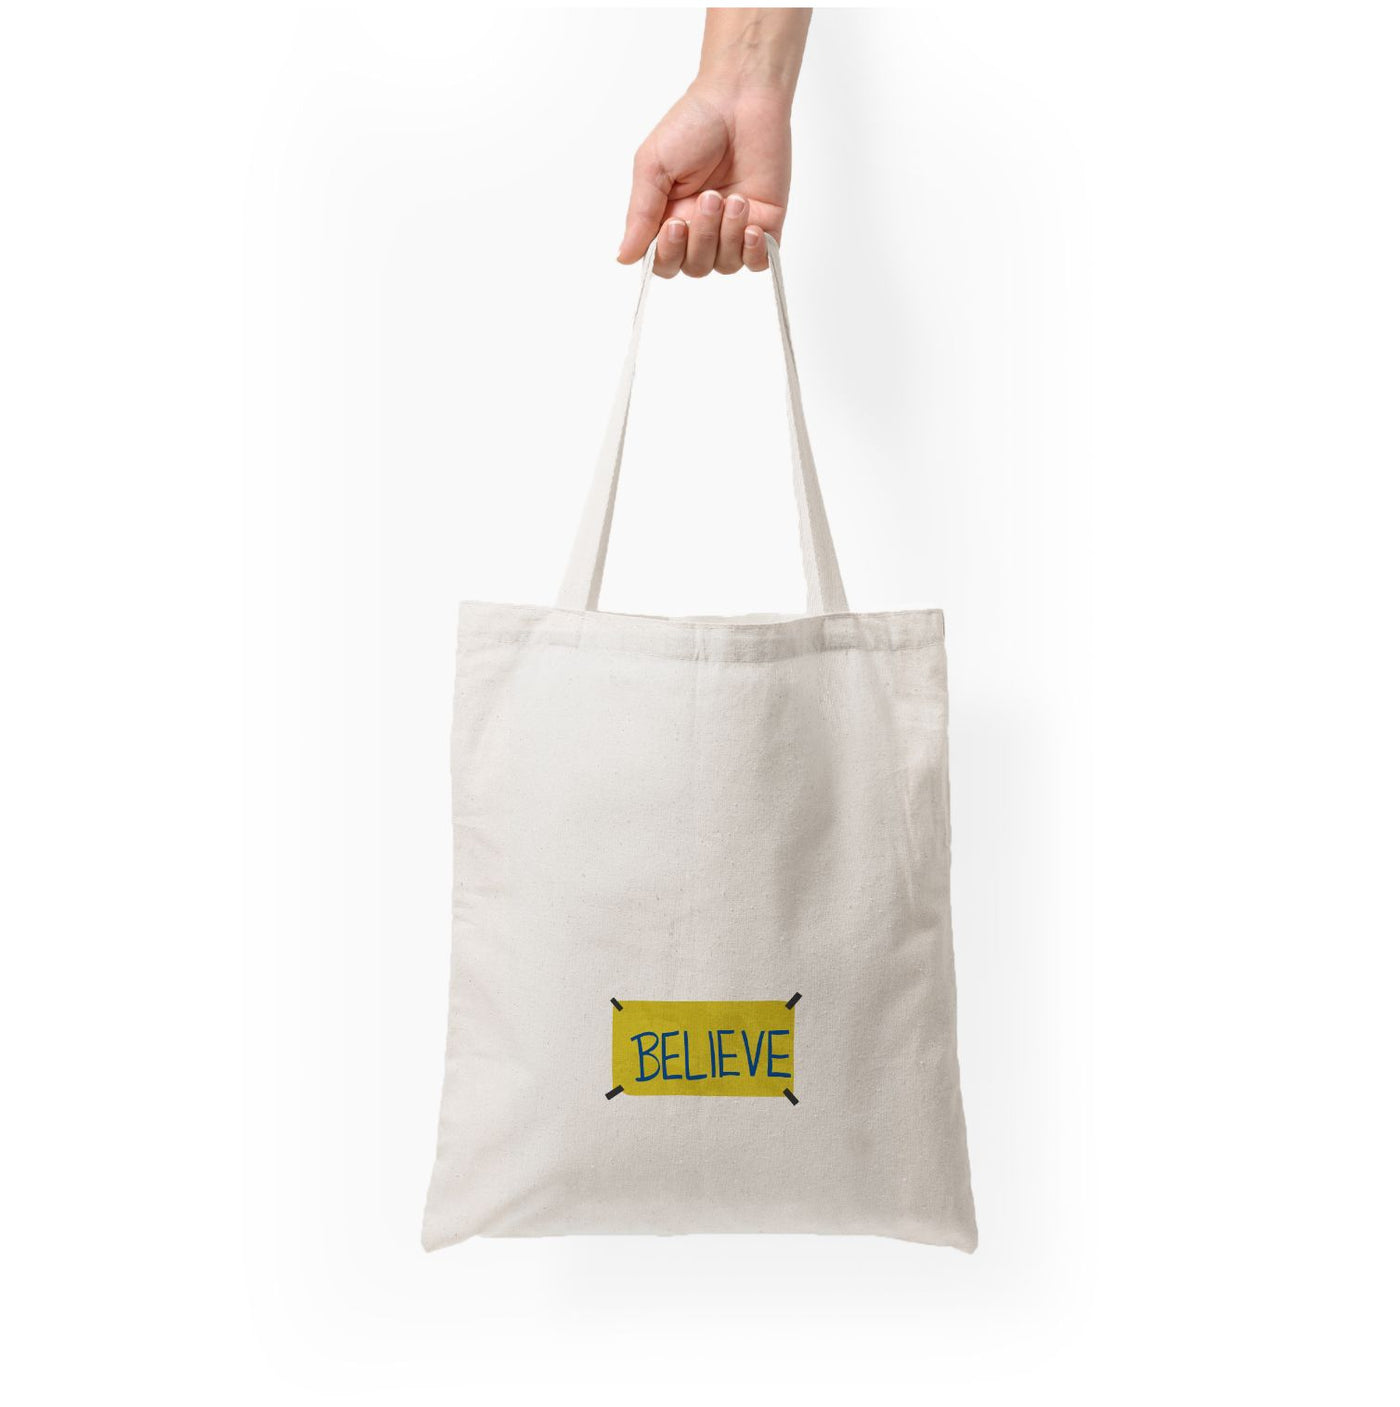 Believe - Ted Lasso Tote Bag